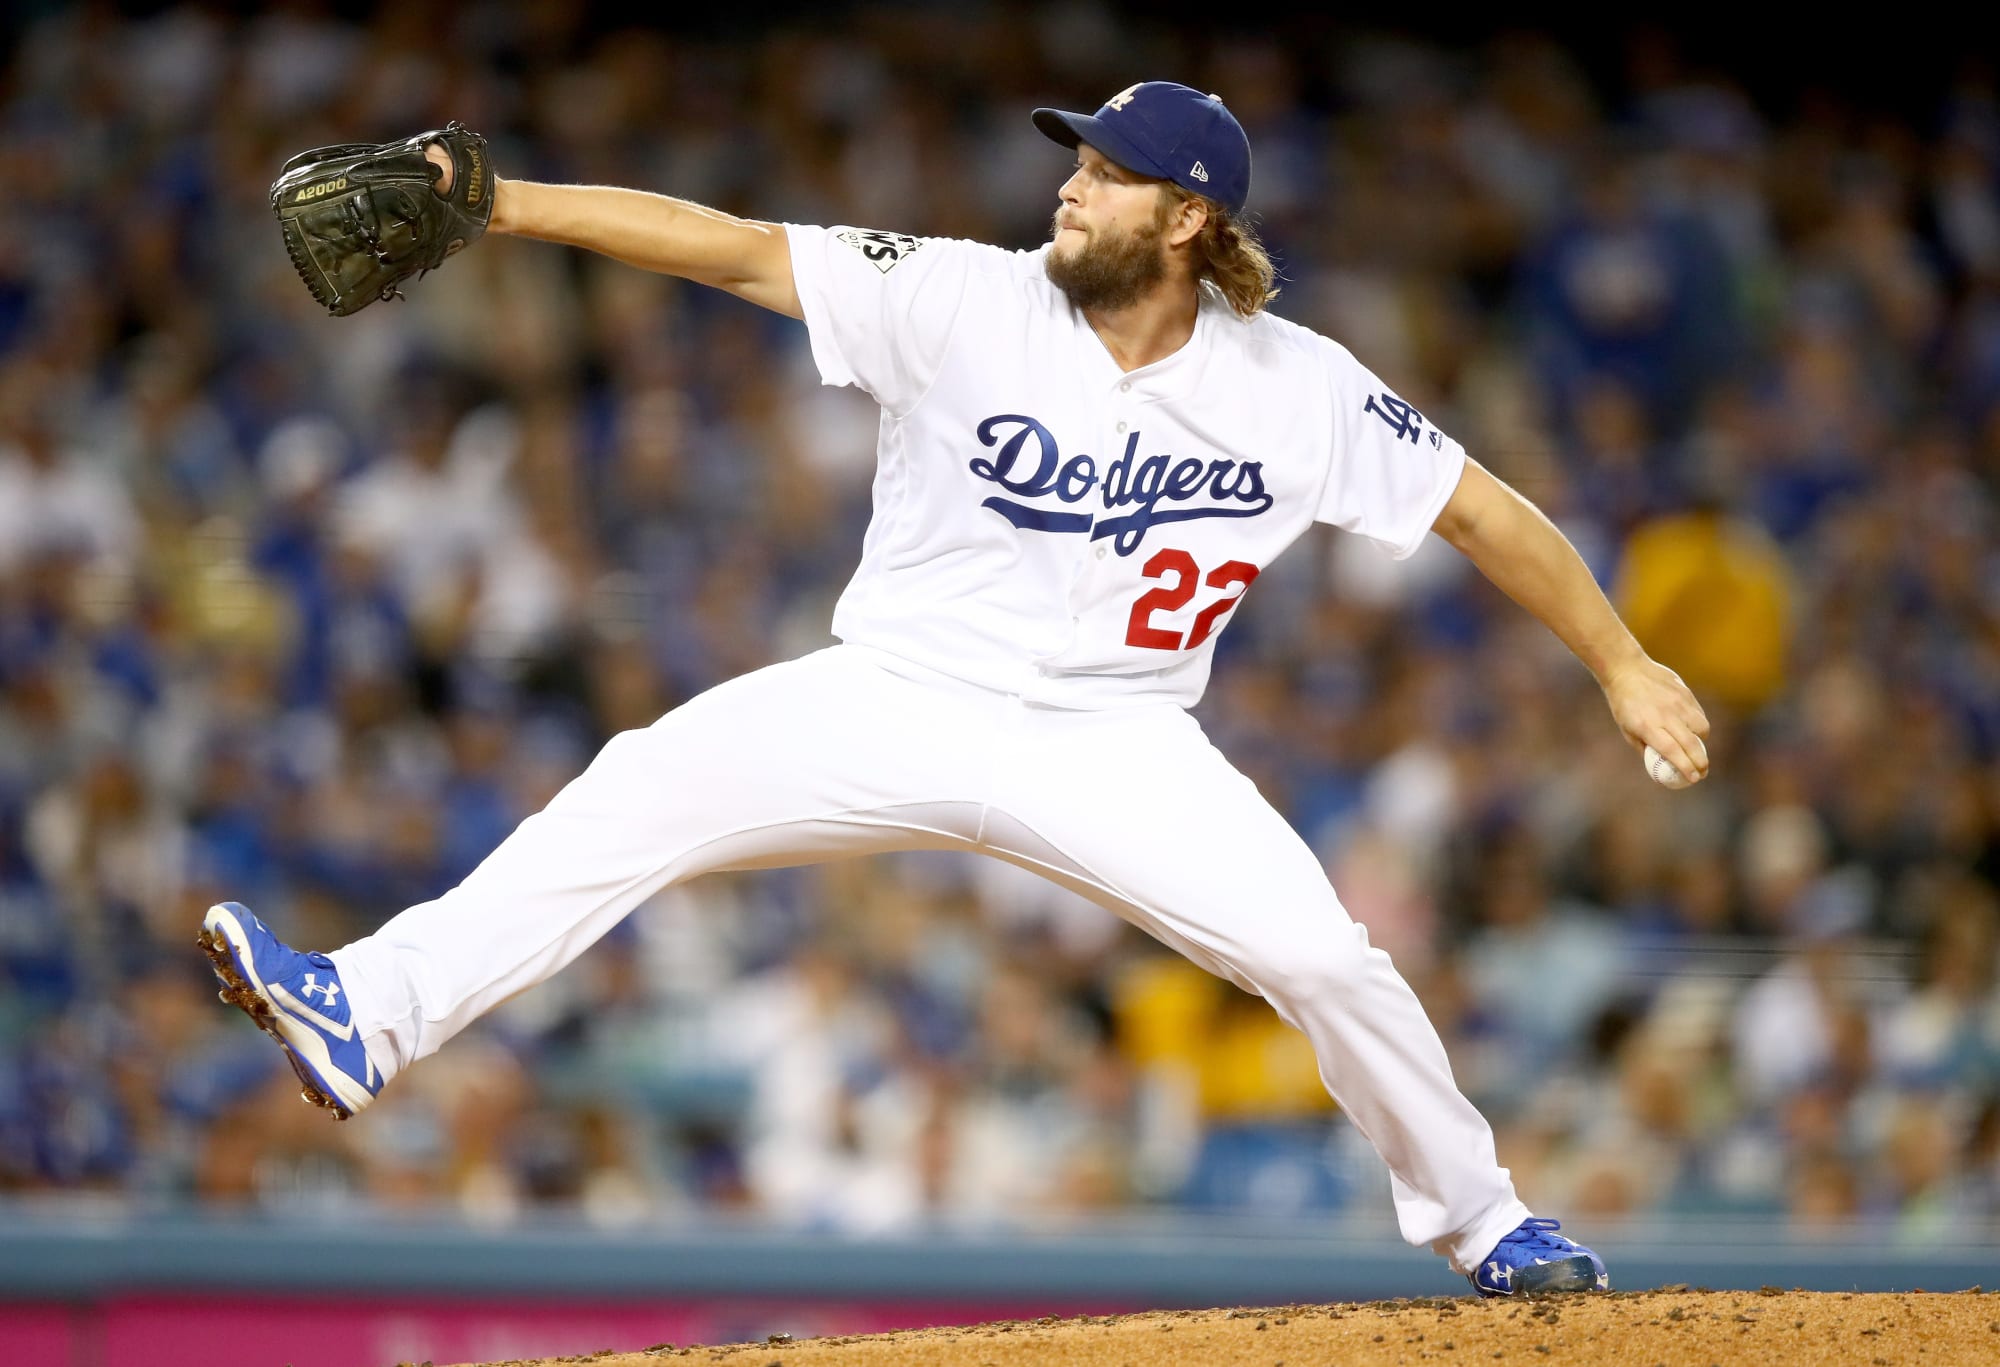 Top 10 starting pitchers in MLB right now